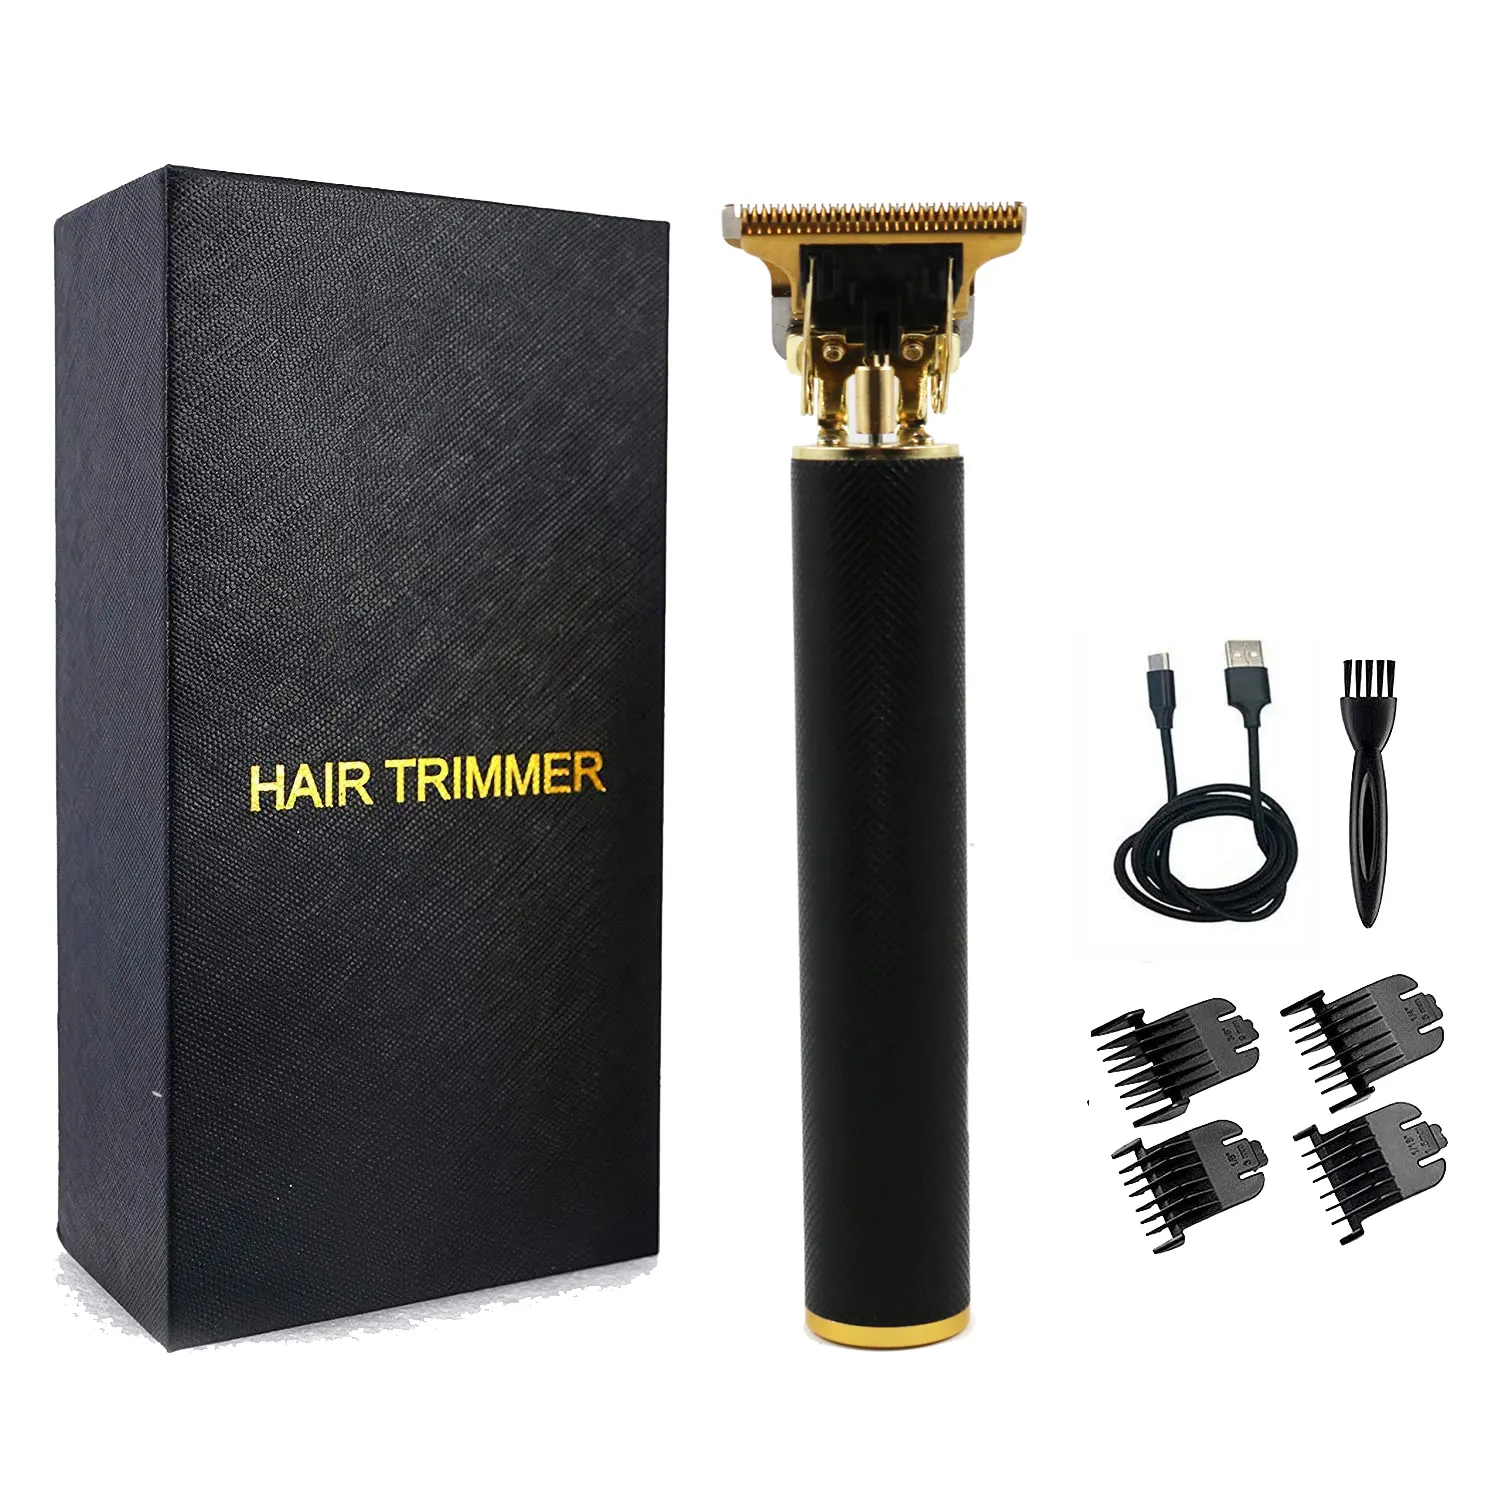 Professional Hair Trimmer Zero Gapped T-Blade Trimmer Cordless Rechargeable Edgers Electric Beard Trimmer Shaver